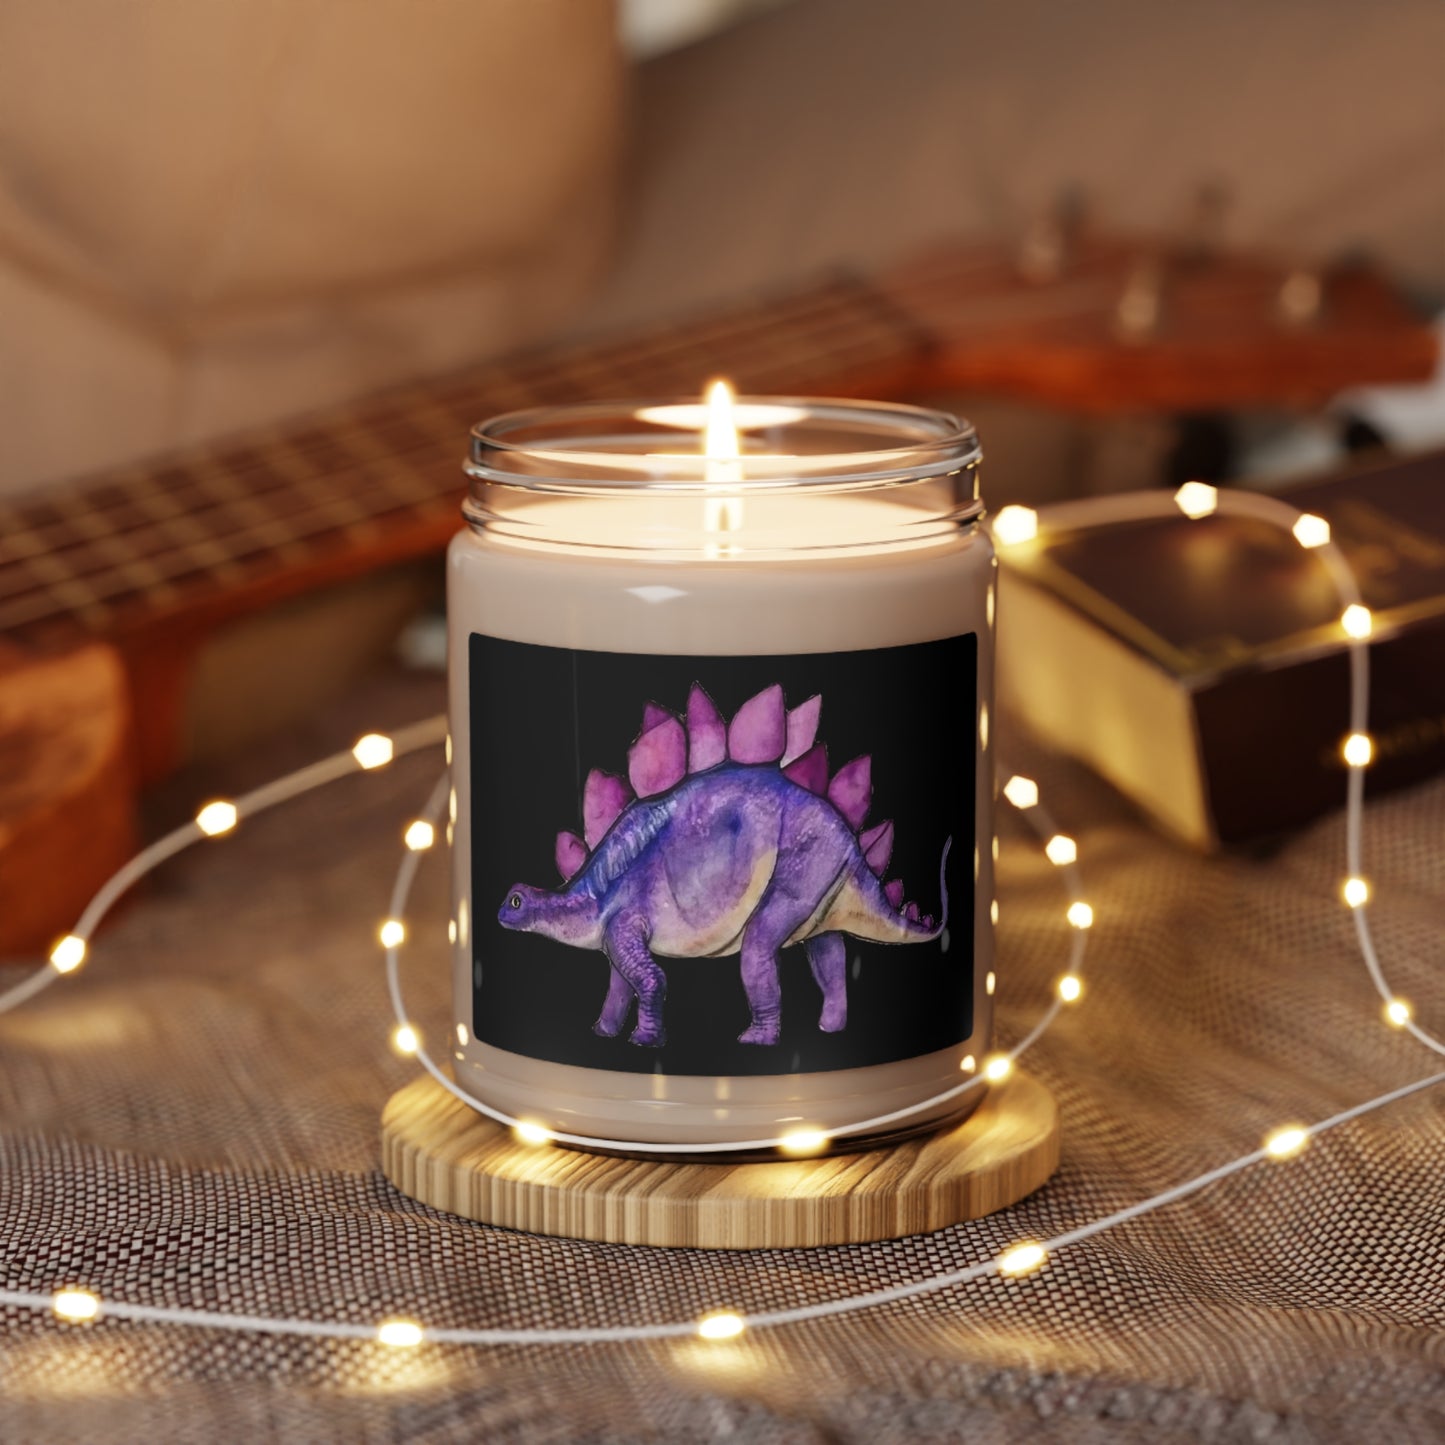 Dreamy Lavender Stegosaurus: Scented Soy Candle, 9oz